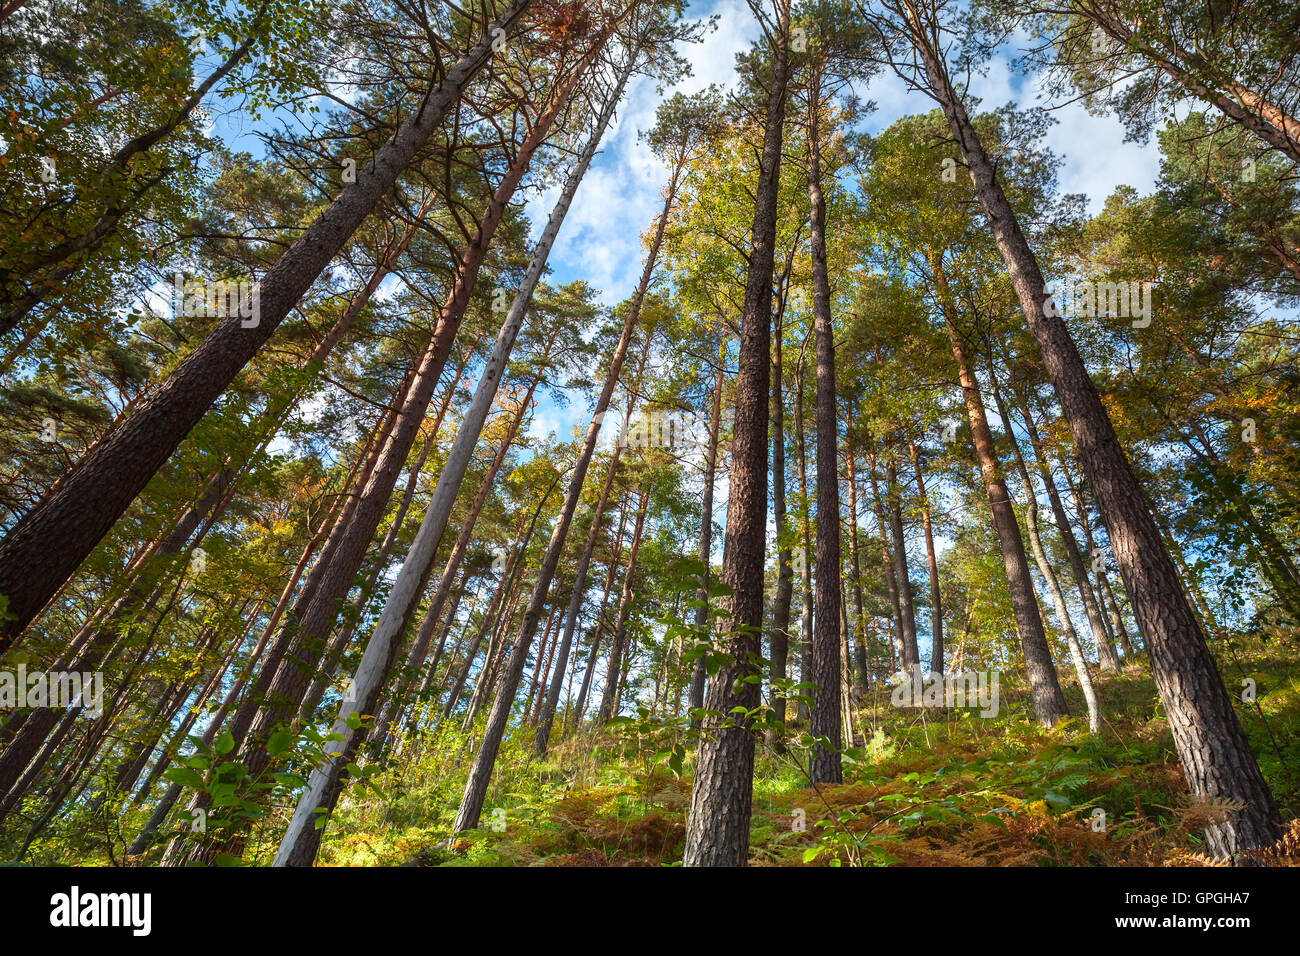 Summer dry coniferous forest landscape, wild tall pine trees above blue sky Stock Photo